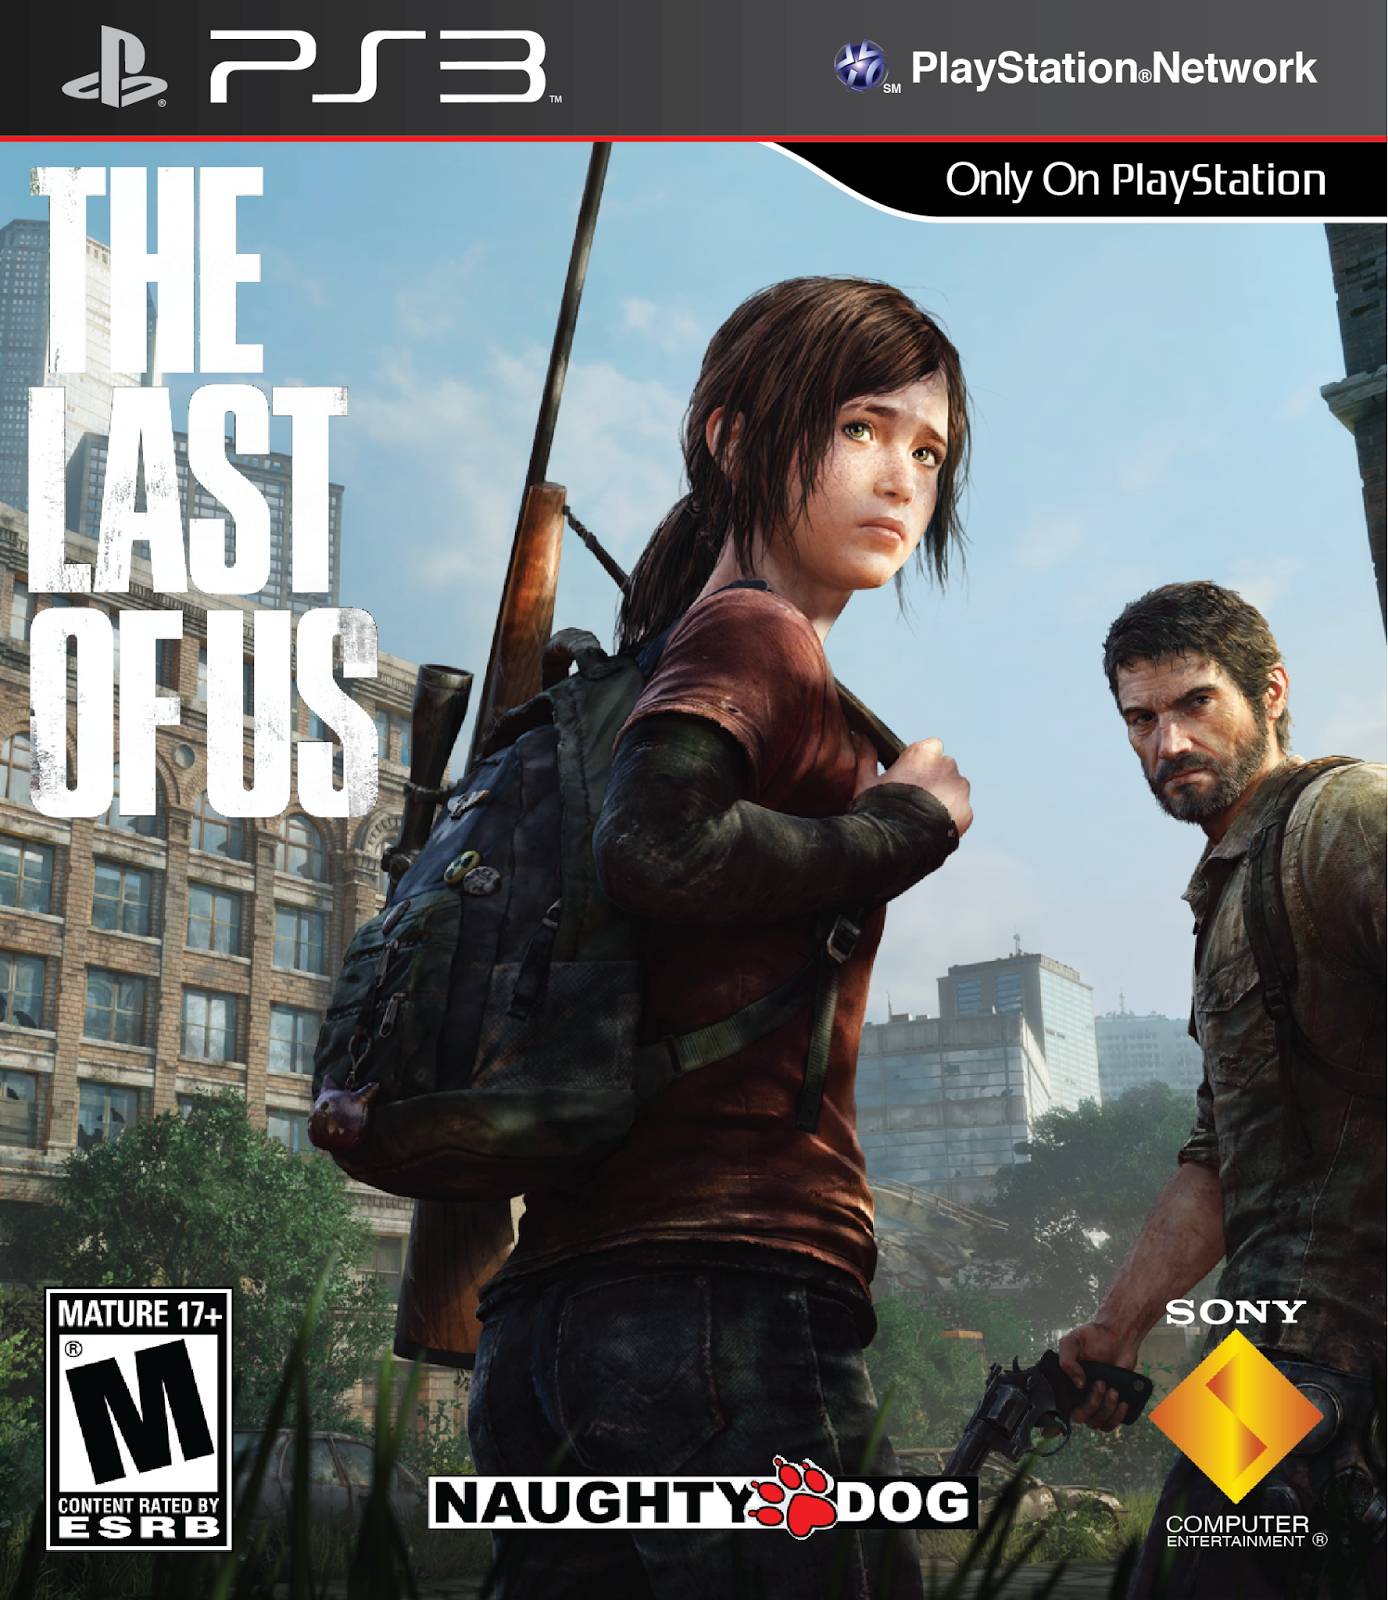 The last of us на пс3. The last of us ps3. Игра ps3 last of us. Ps3 версия the last of us.